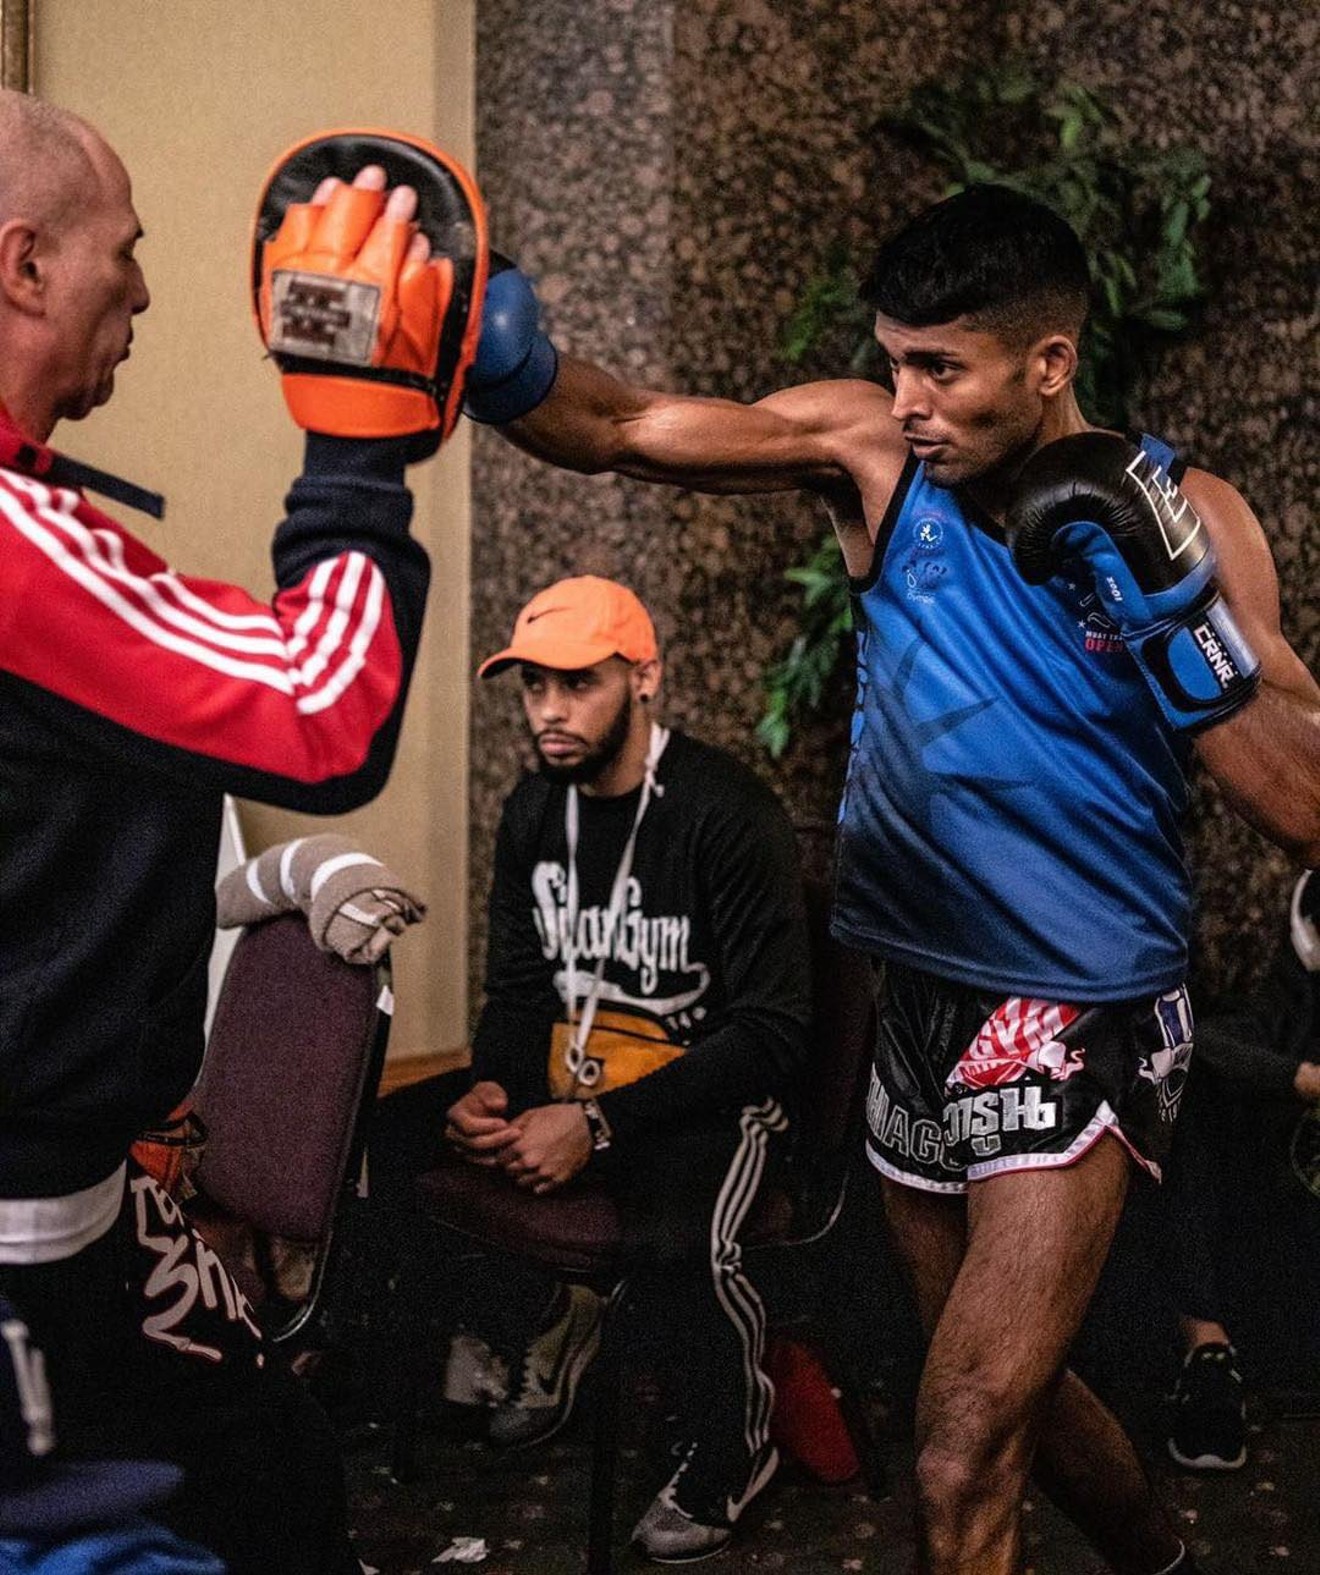 A fighter at a USMTO event warms up. Muay Thai has been gaining more recognition in the U.S.